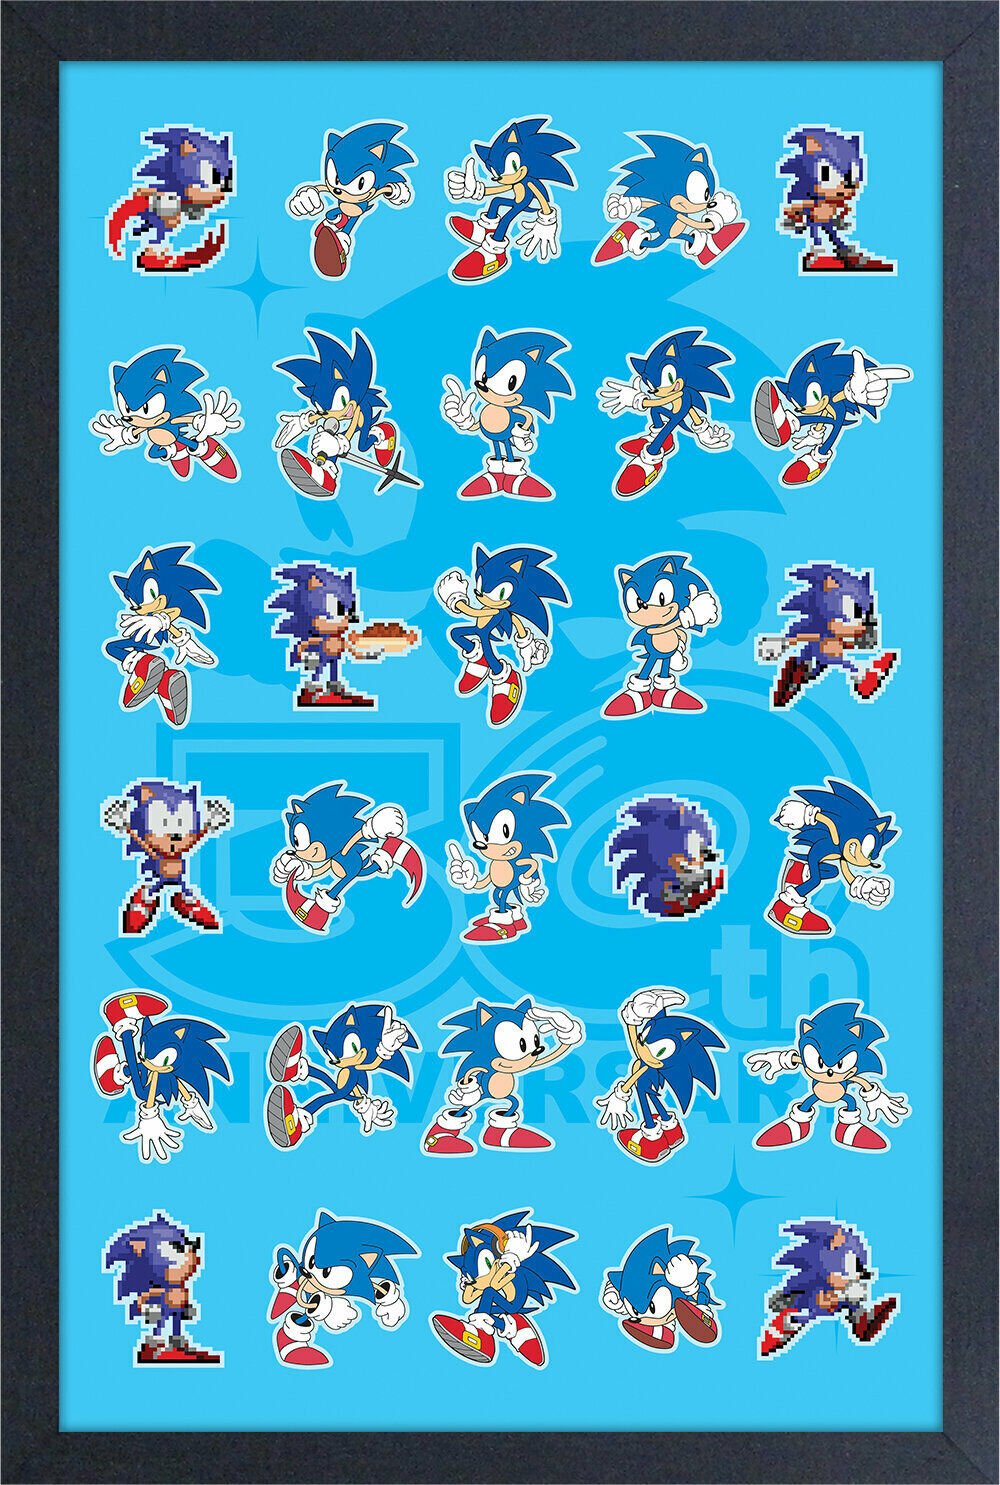 SRB2 Pre-Halloween Sonic Sonic 3 Style Sprites by ColdsterColdy on